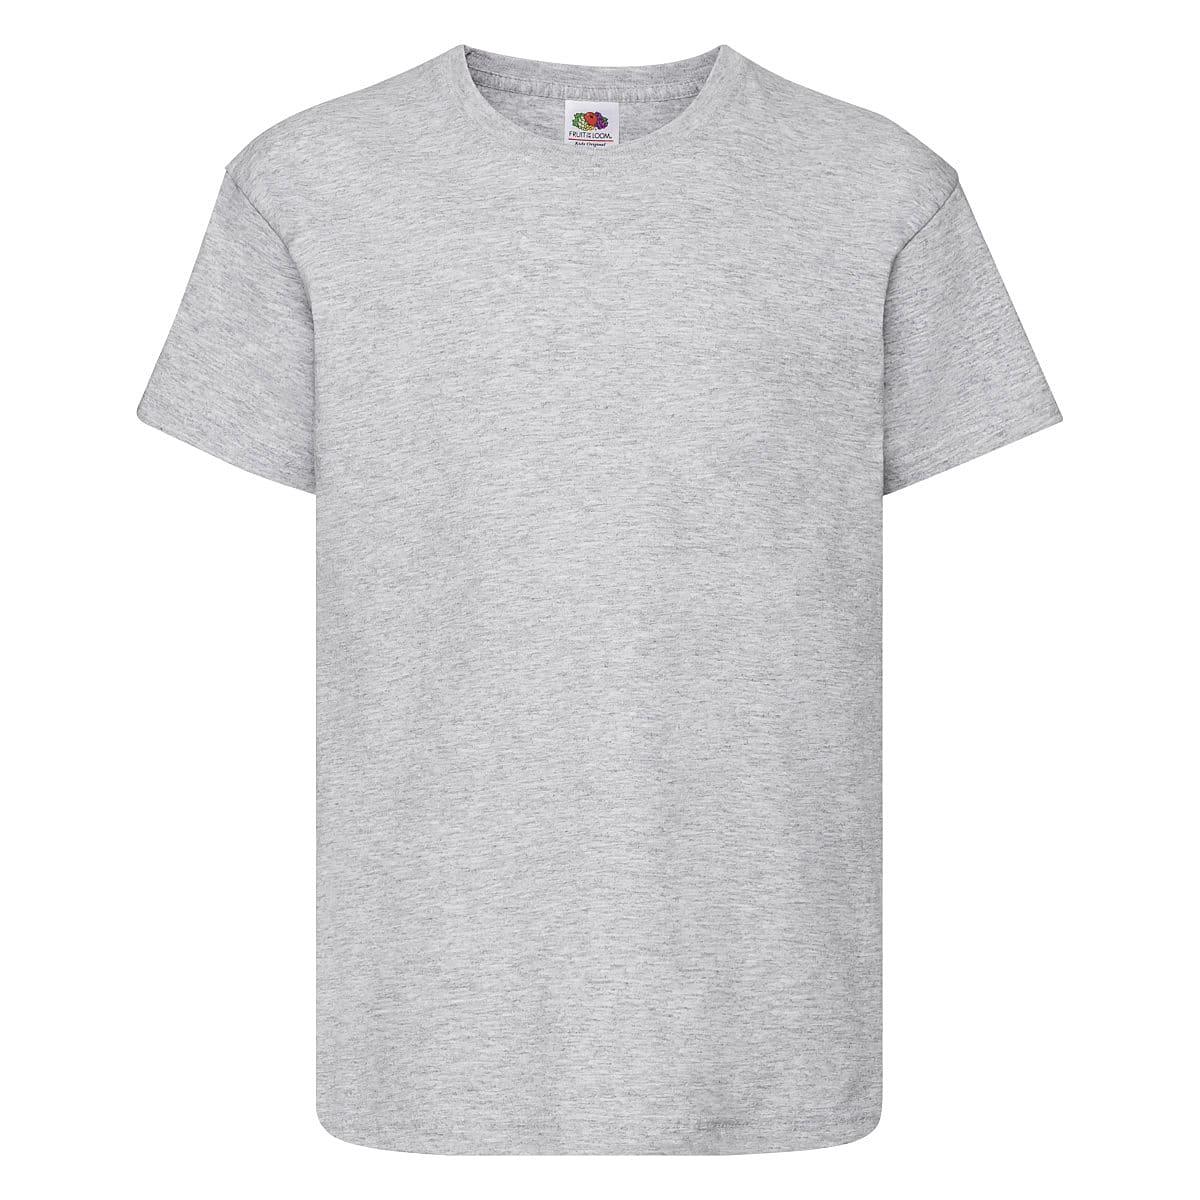 Fruit Of The Loom Kids Original T-Shirt in Heather Grey (Product Code: 61019)